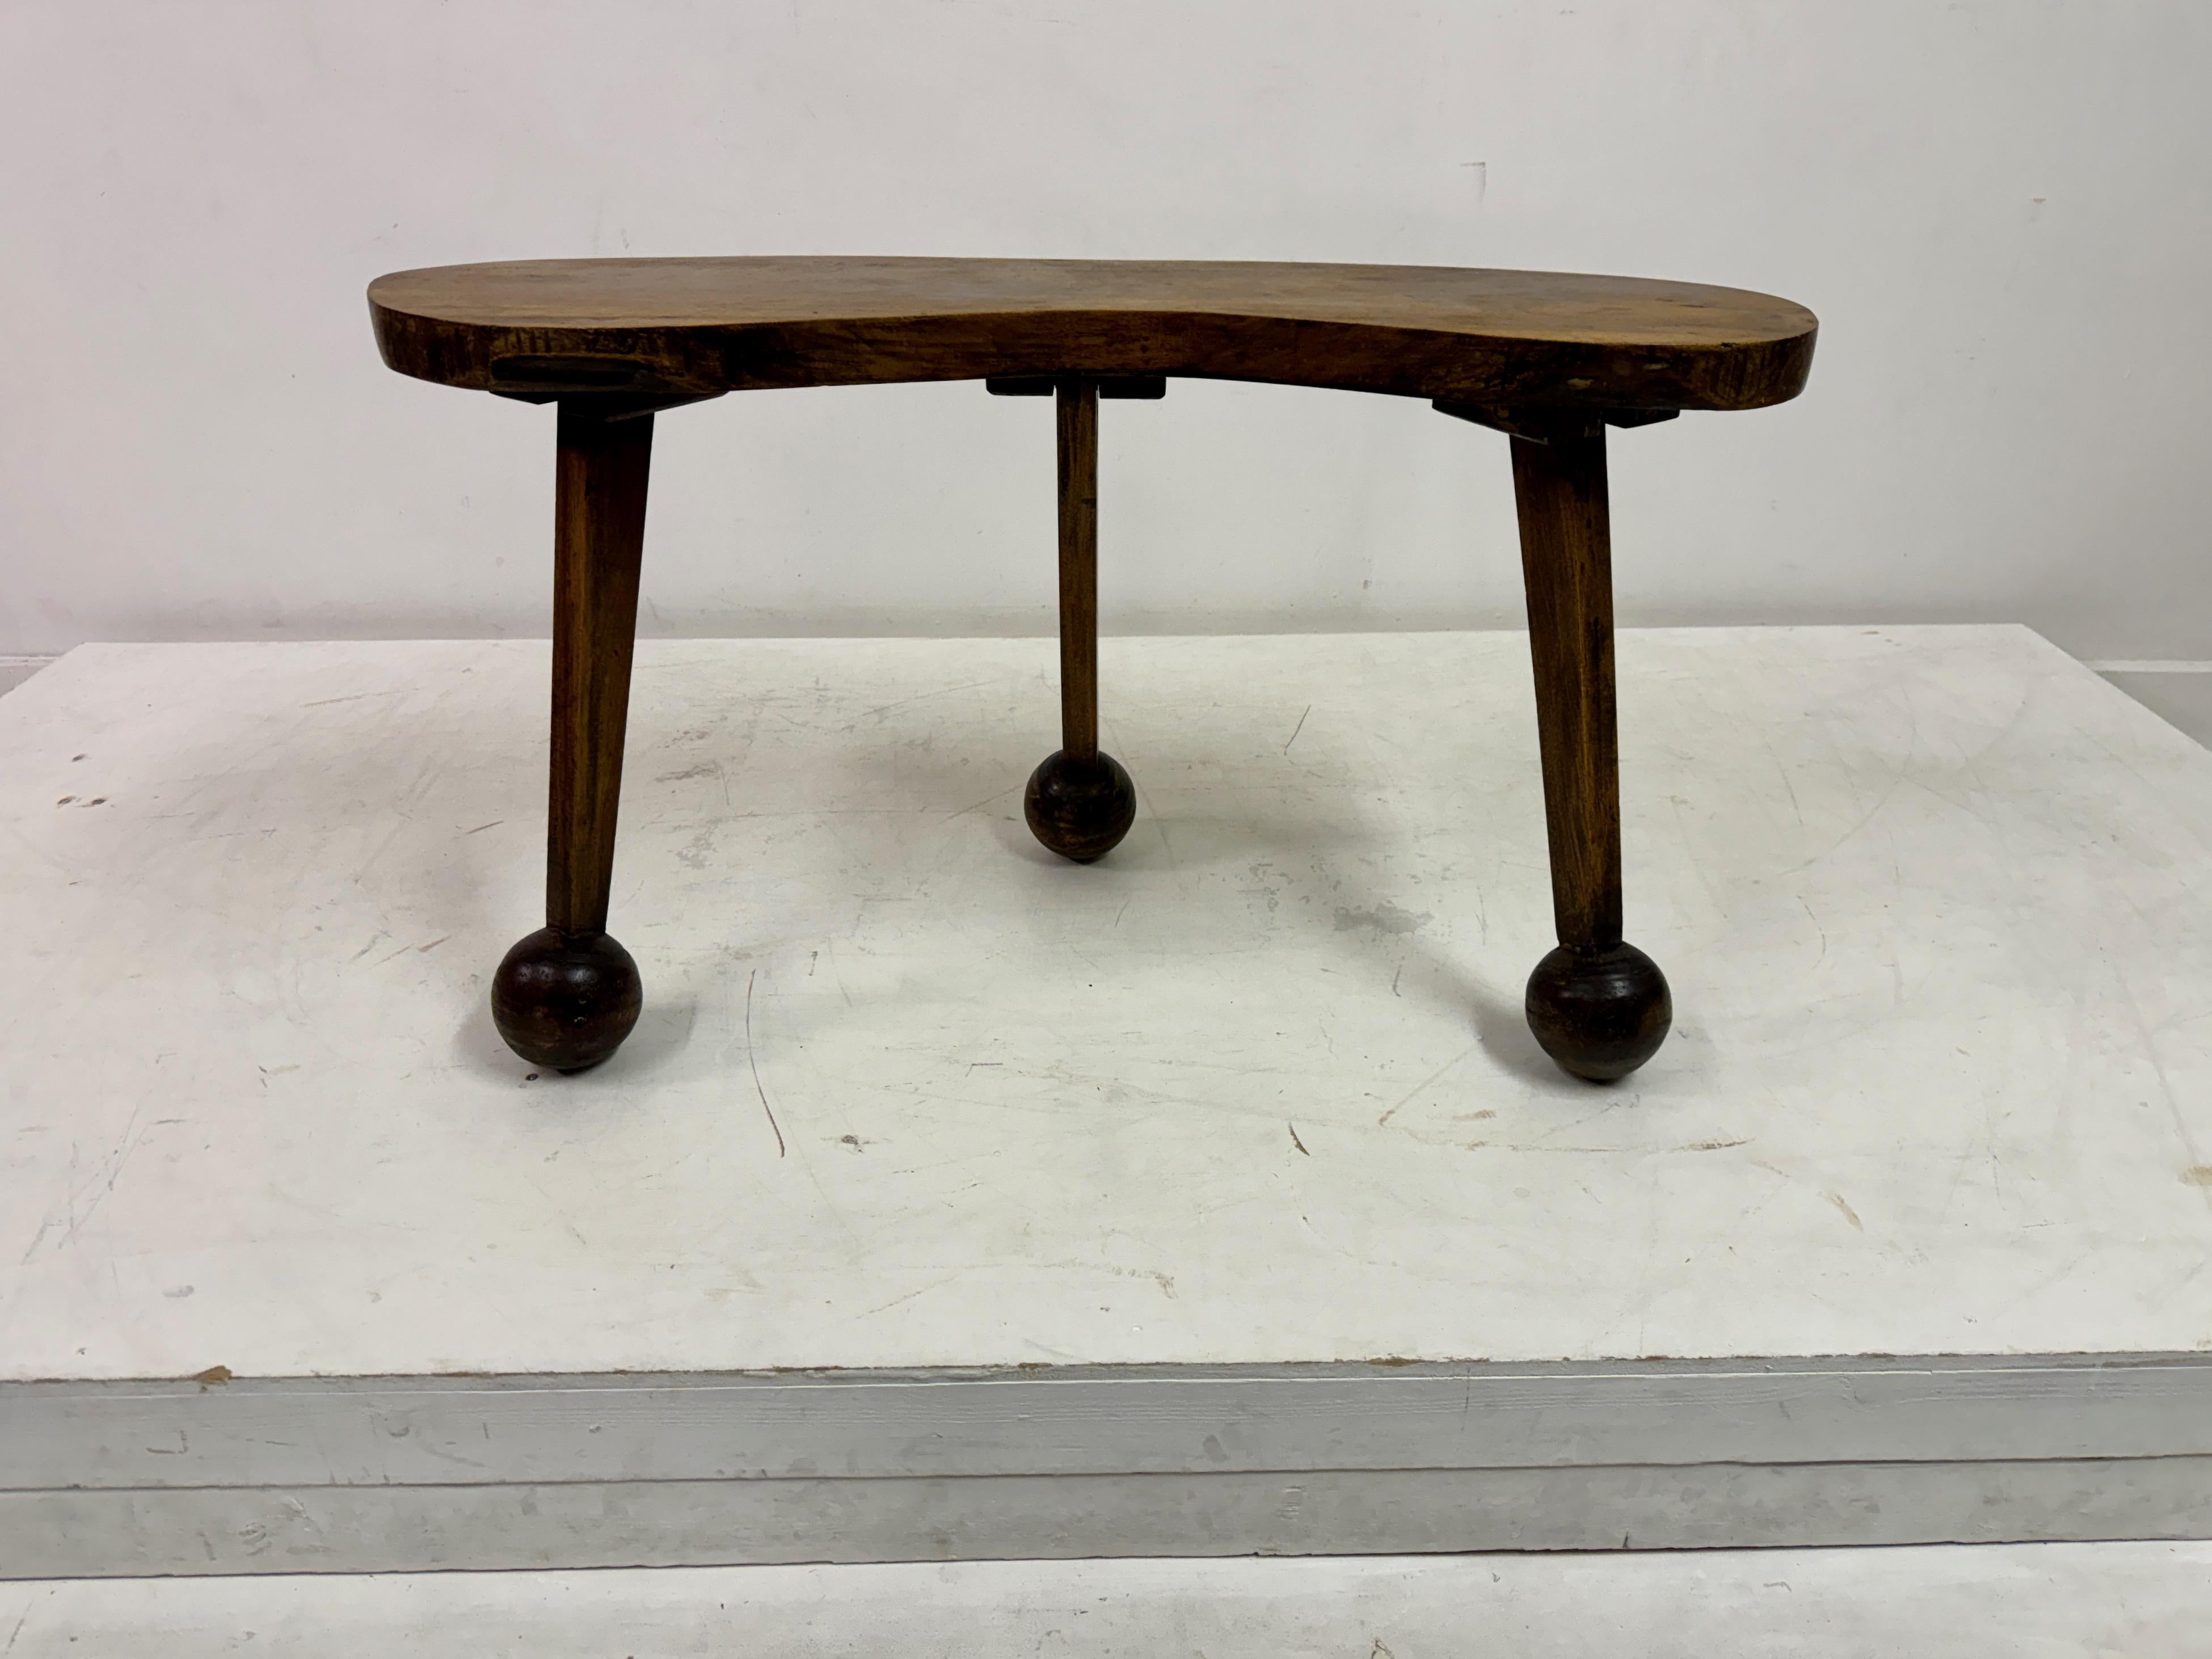 Coffee table or could be used as a bench

Rustic 

Irregular kidney-shaped top

Three legs

Wooden spherical feet

Mid century
